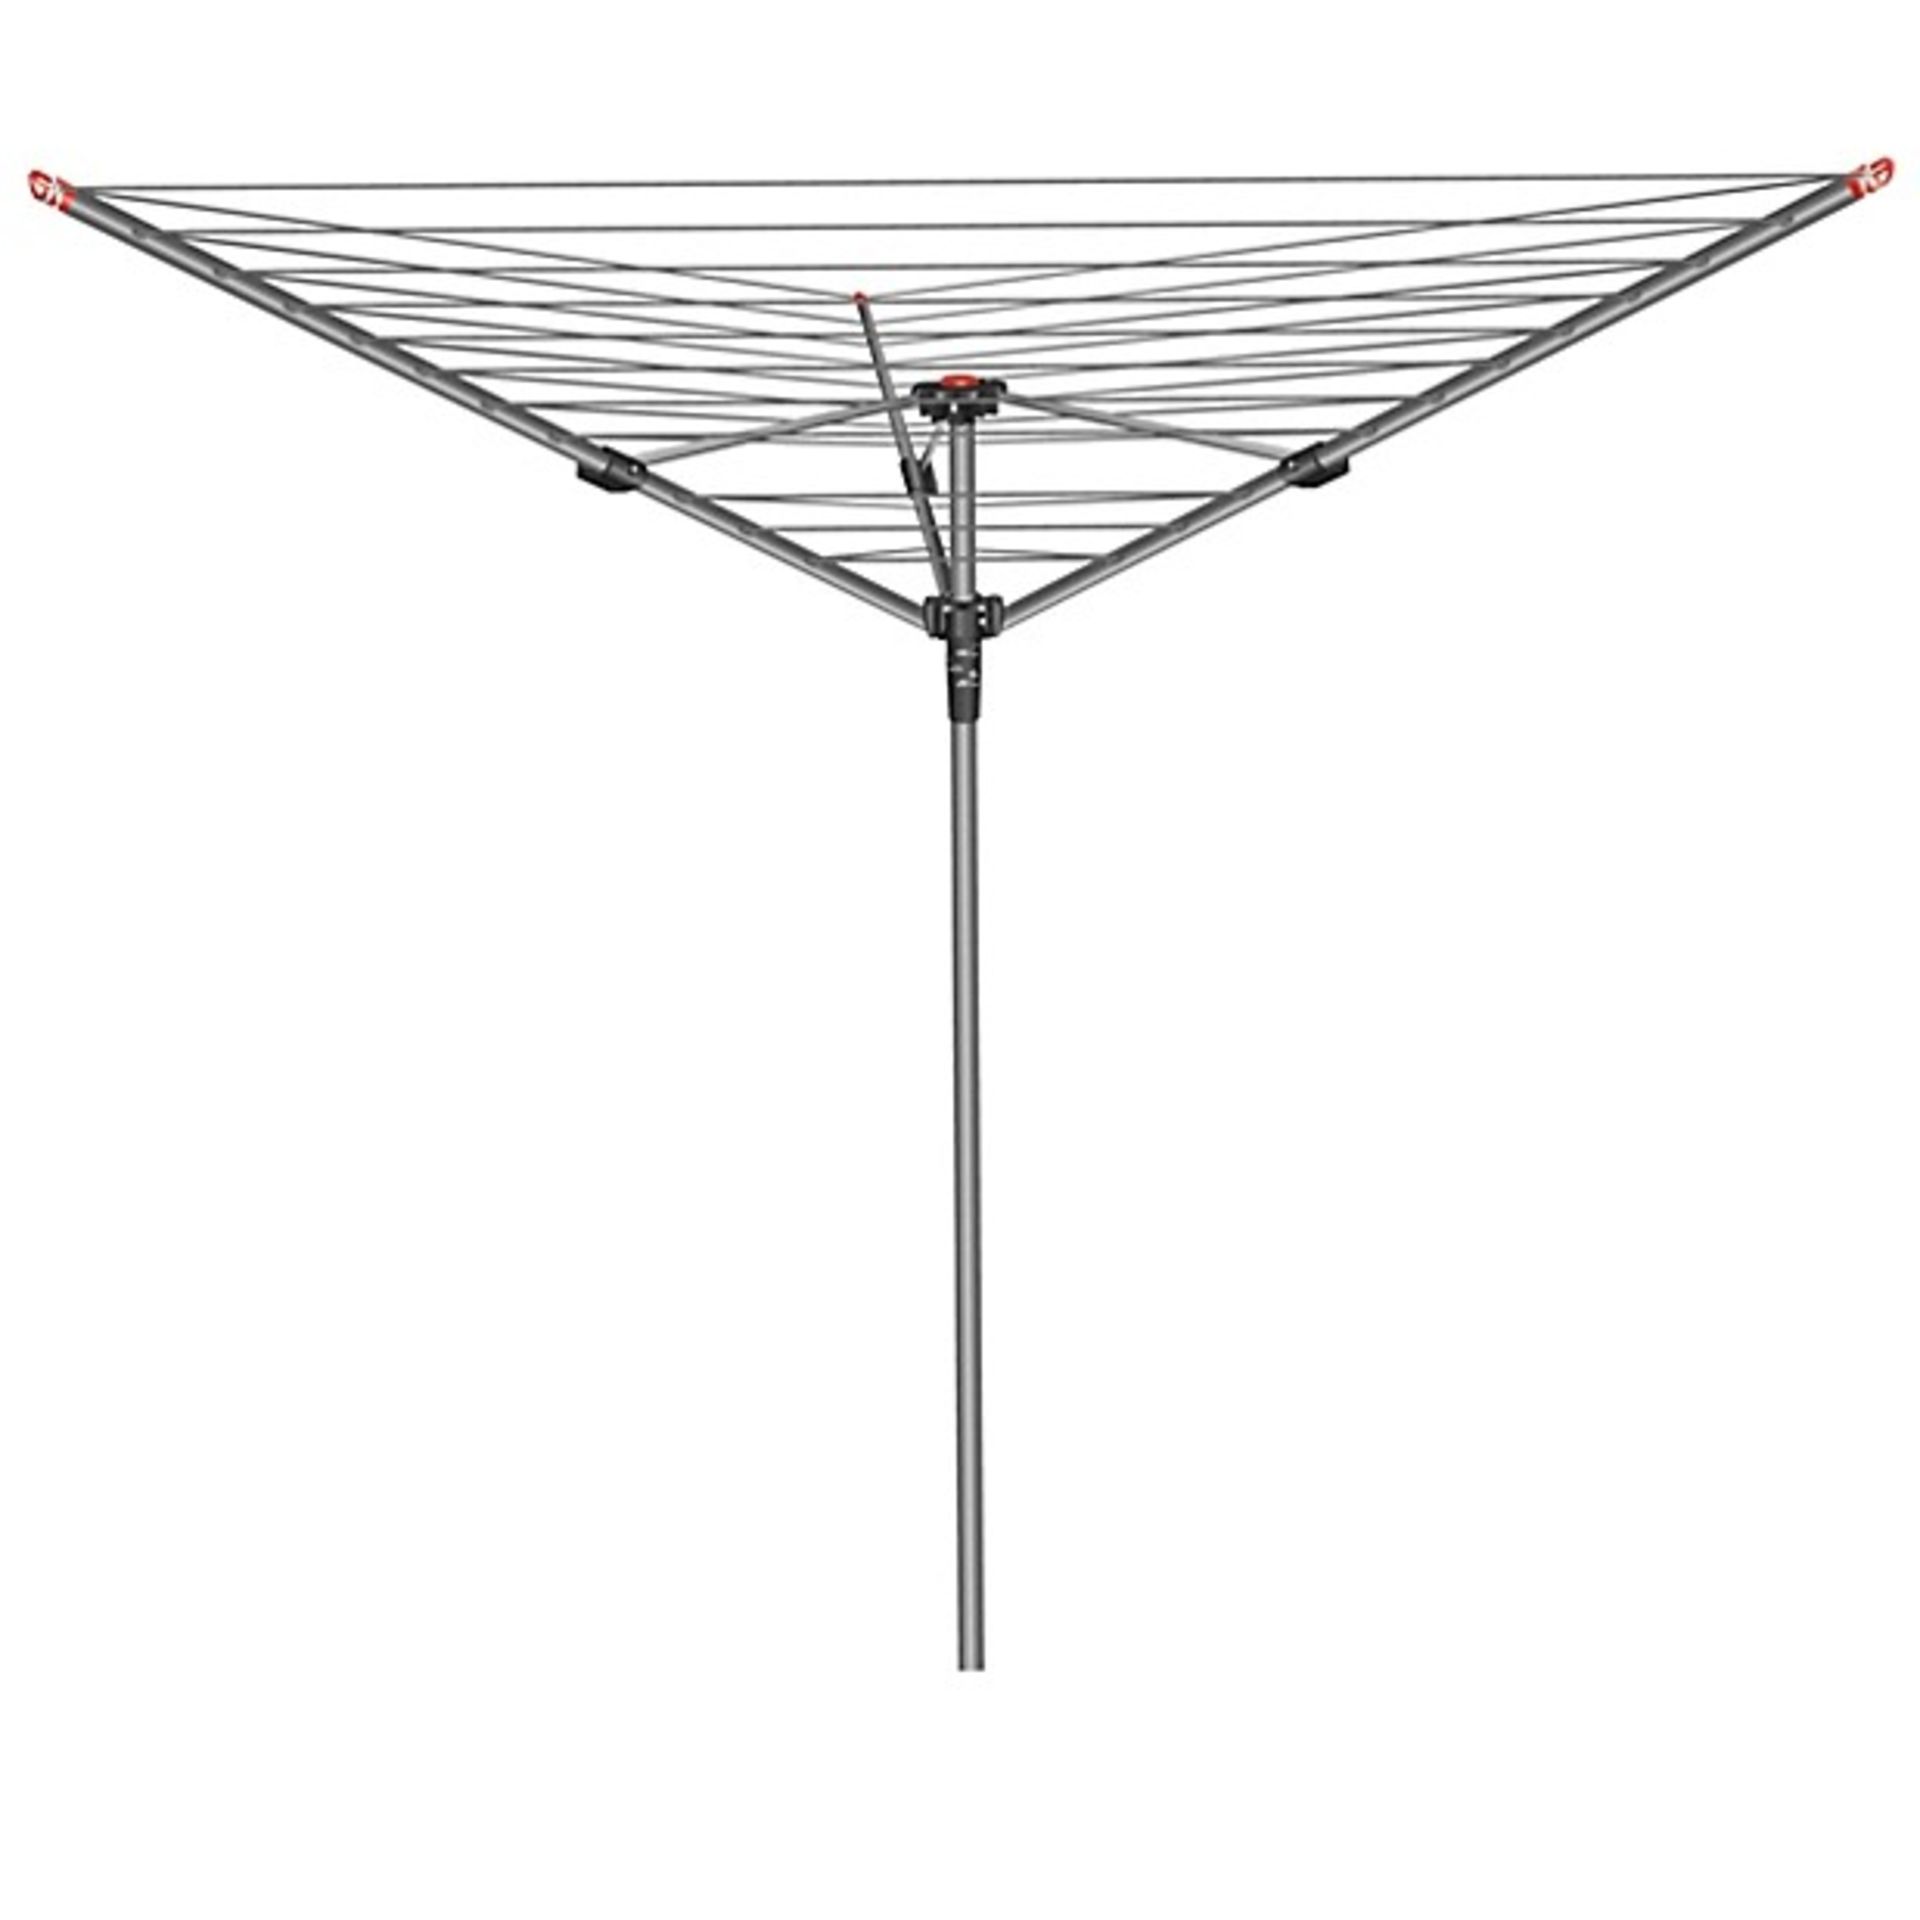 Vileda Turning Circle 2.43m Grey Steel 3 Arm Rotary airer - ER51